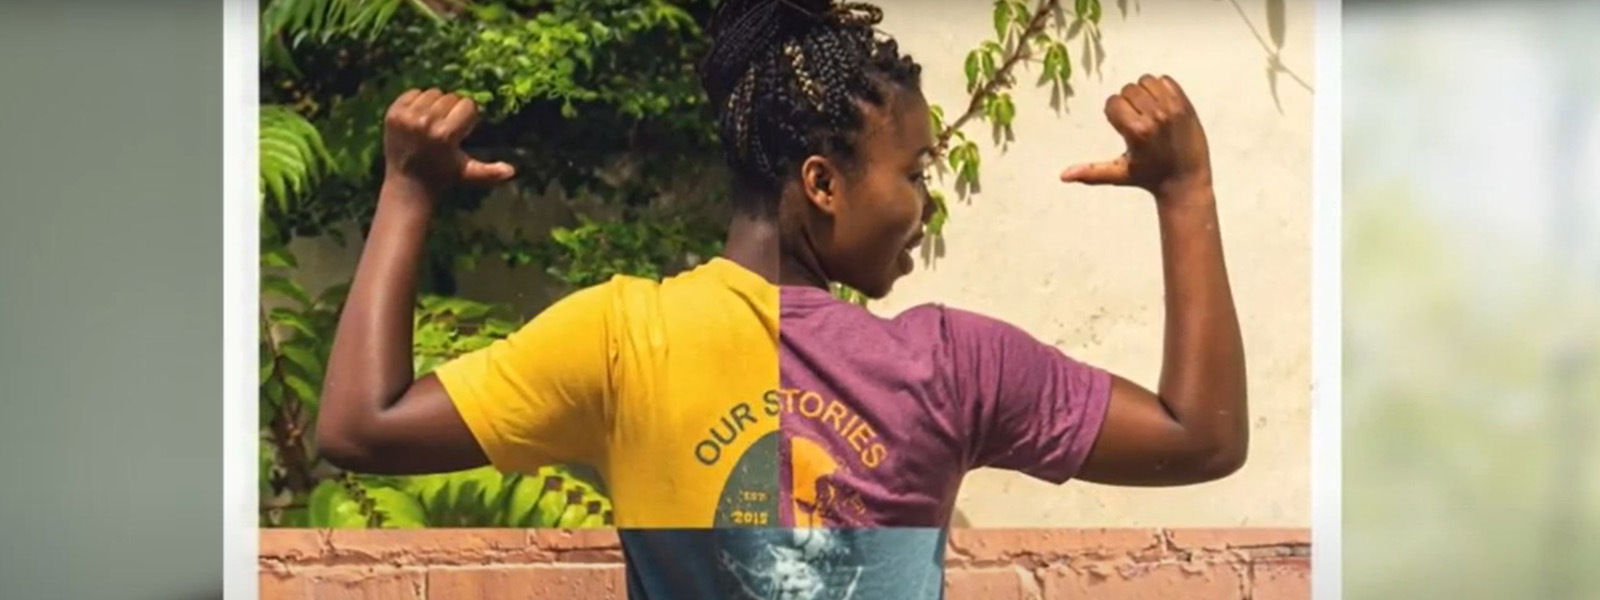 Black woman with braids shows off the back of her T-Shirt that reads ""Our Stories"